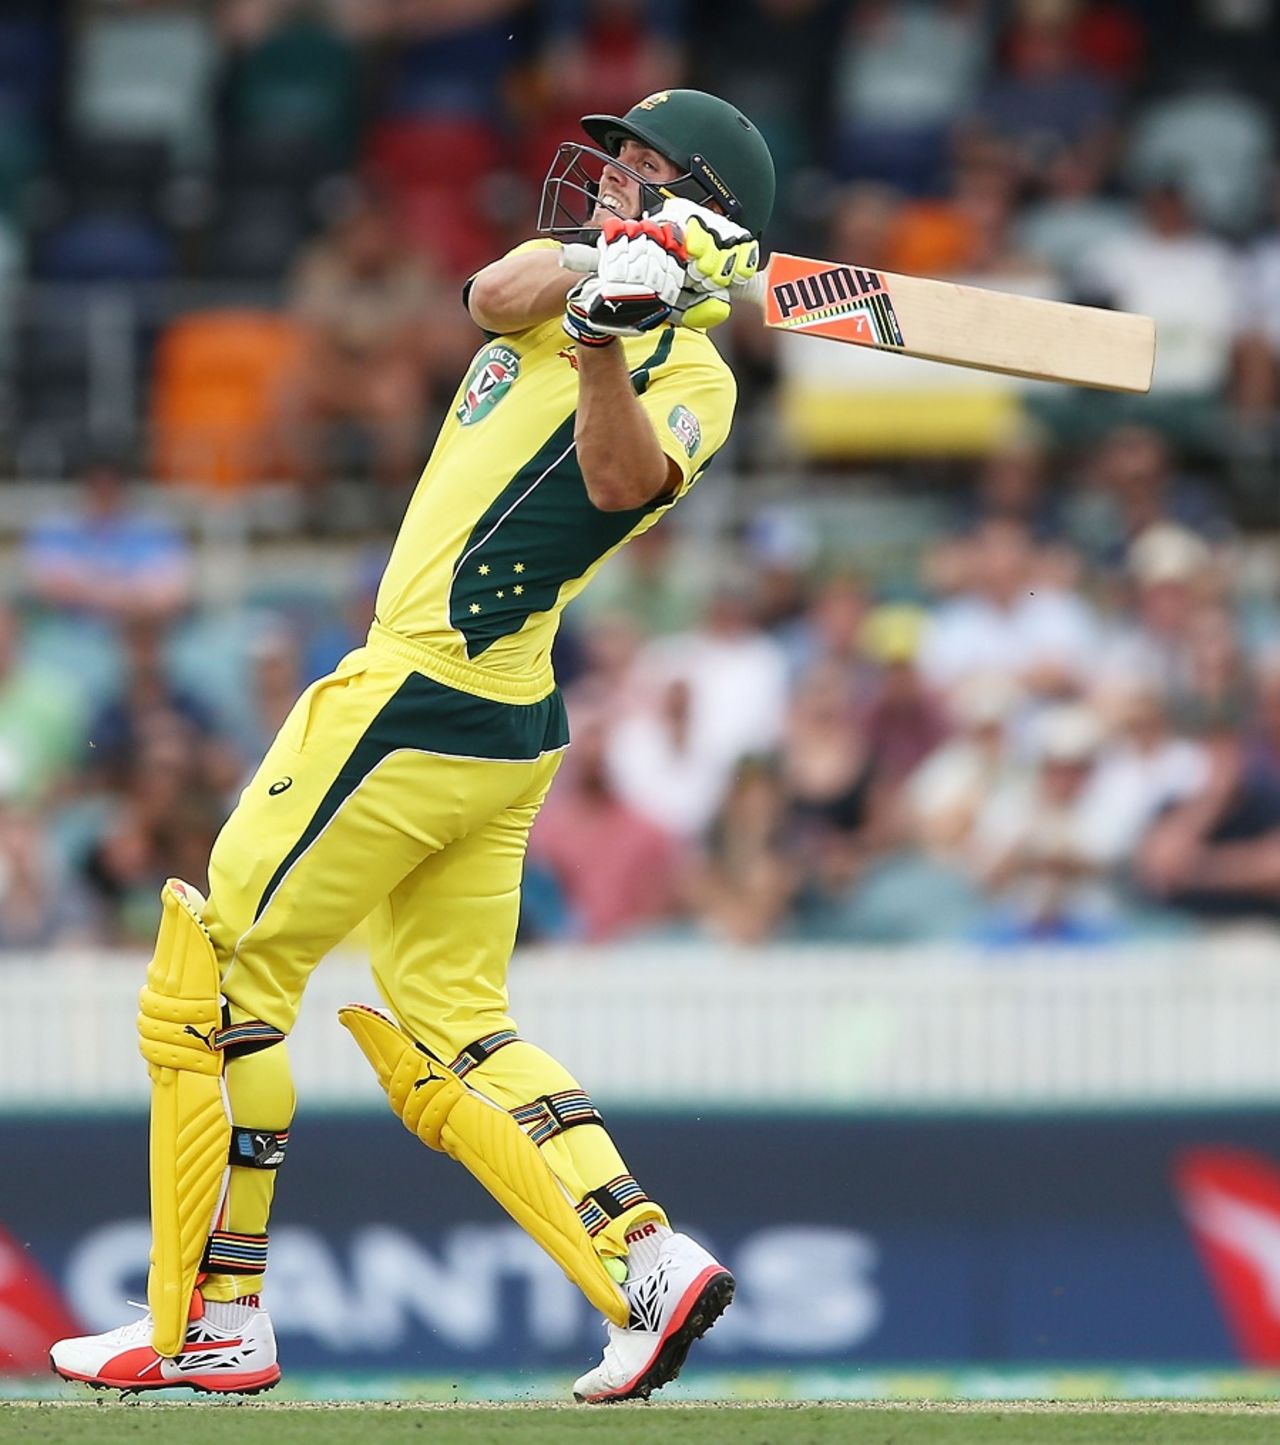 Mitchell Marsh swung his way to 76 not out off 40 balls, Australia v New Zealand, 2nd ODI, Canberra, December 6, 2016